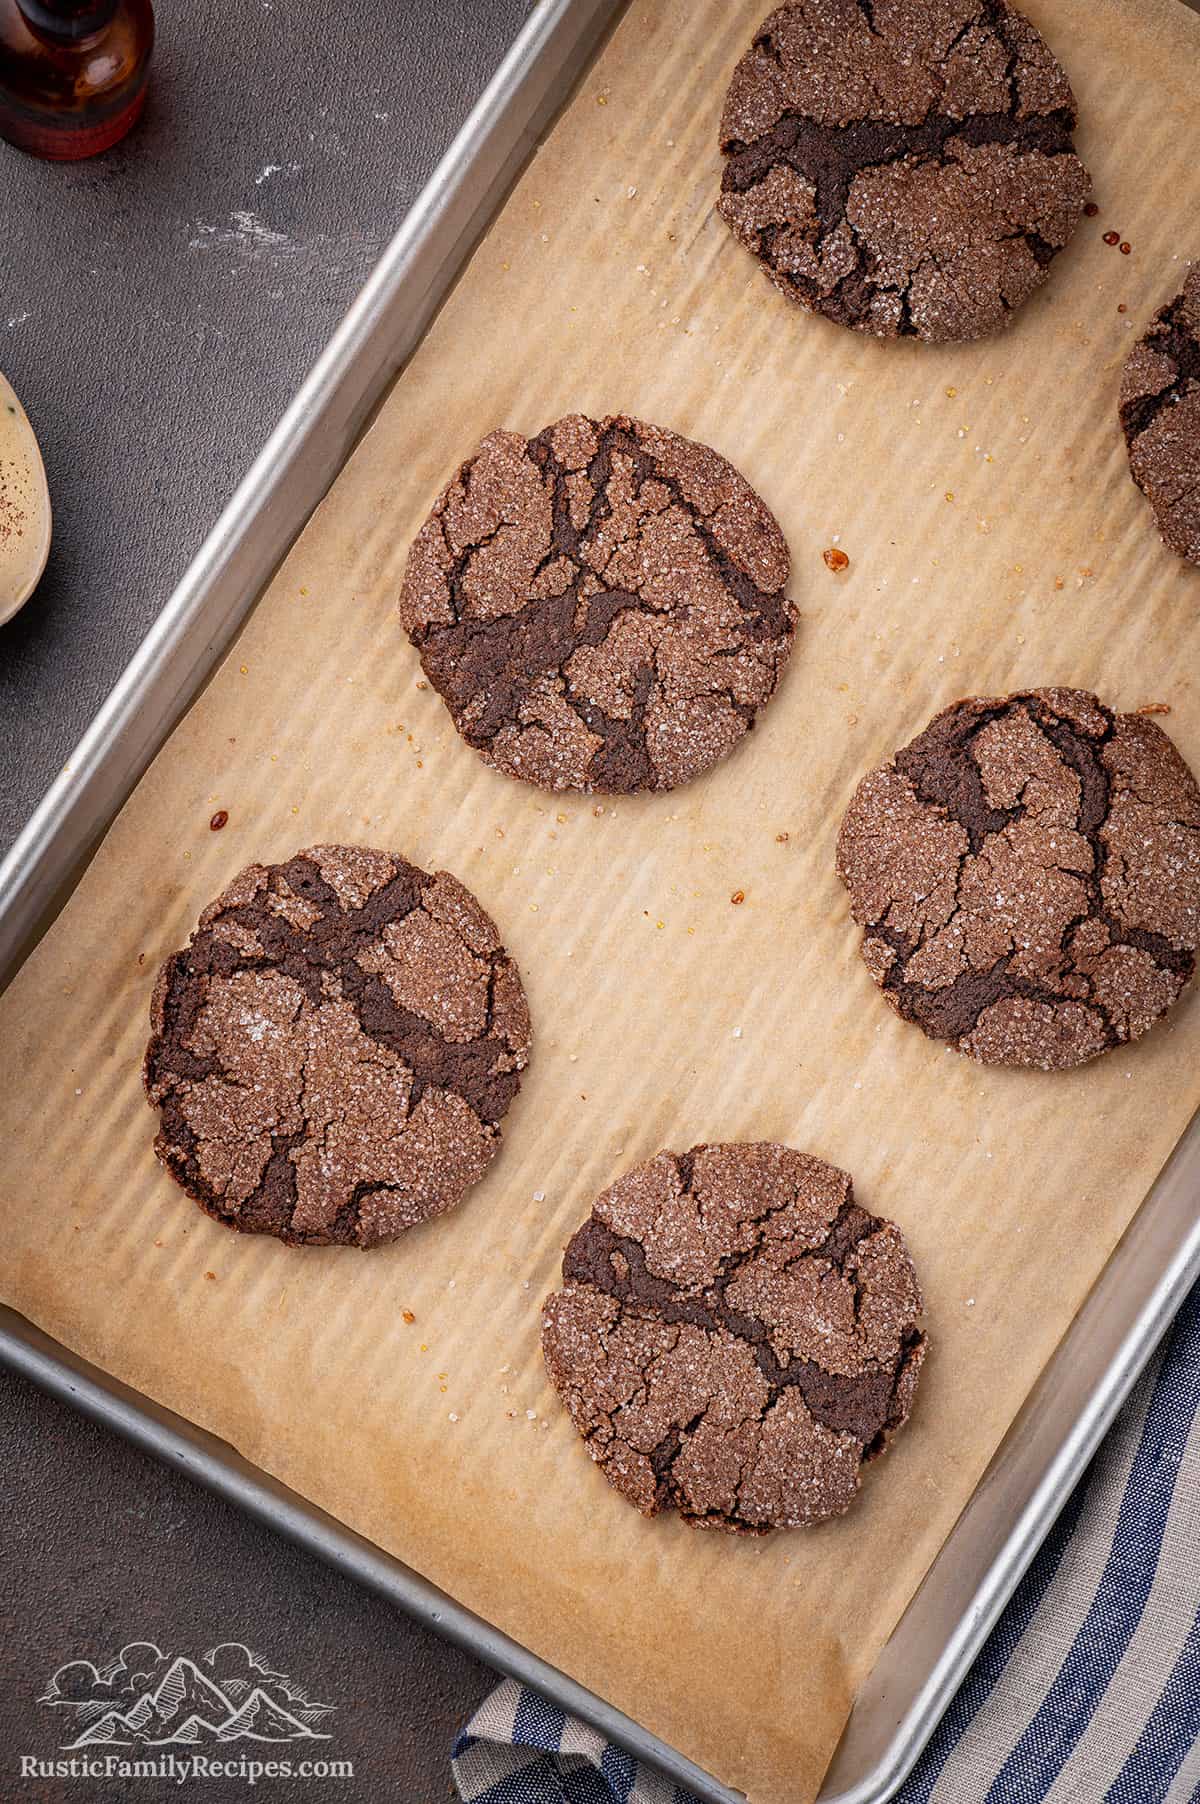 Freshly baked chocolate sugar cookies on a baking tray